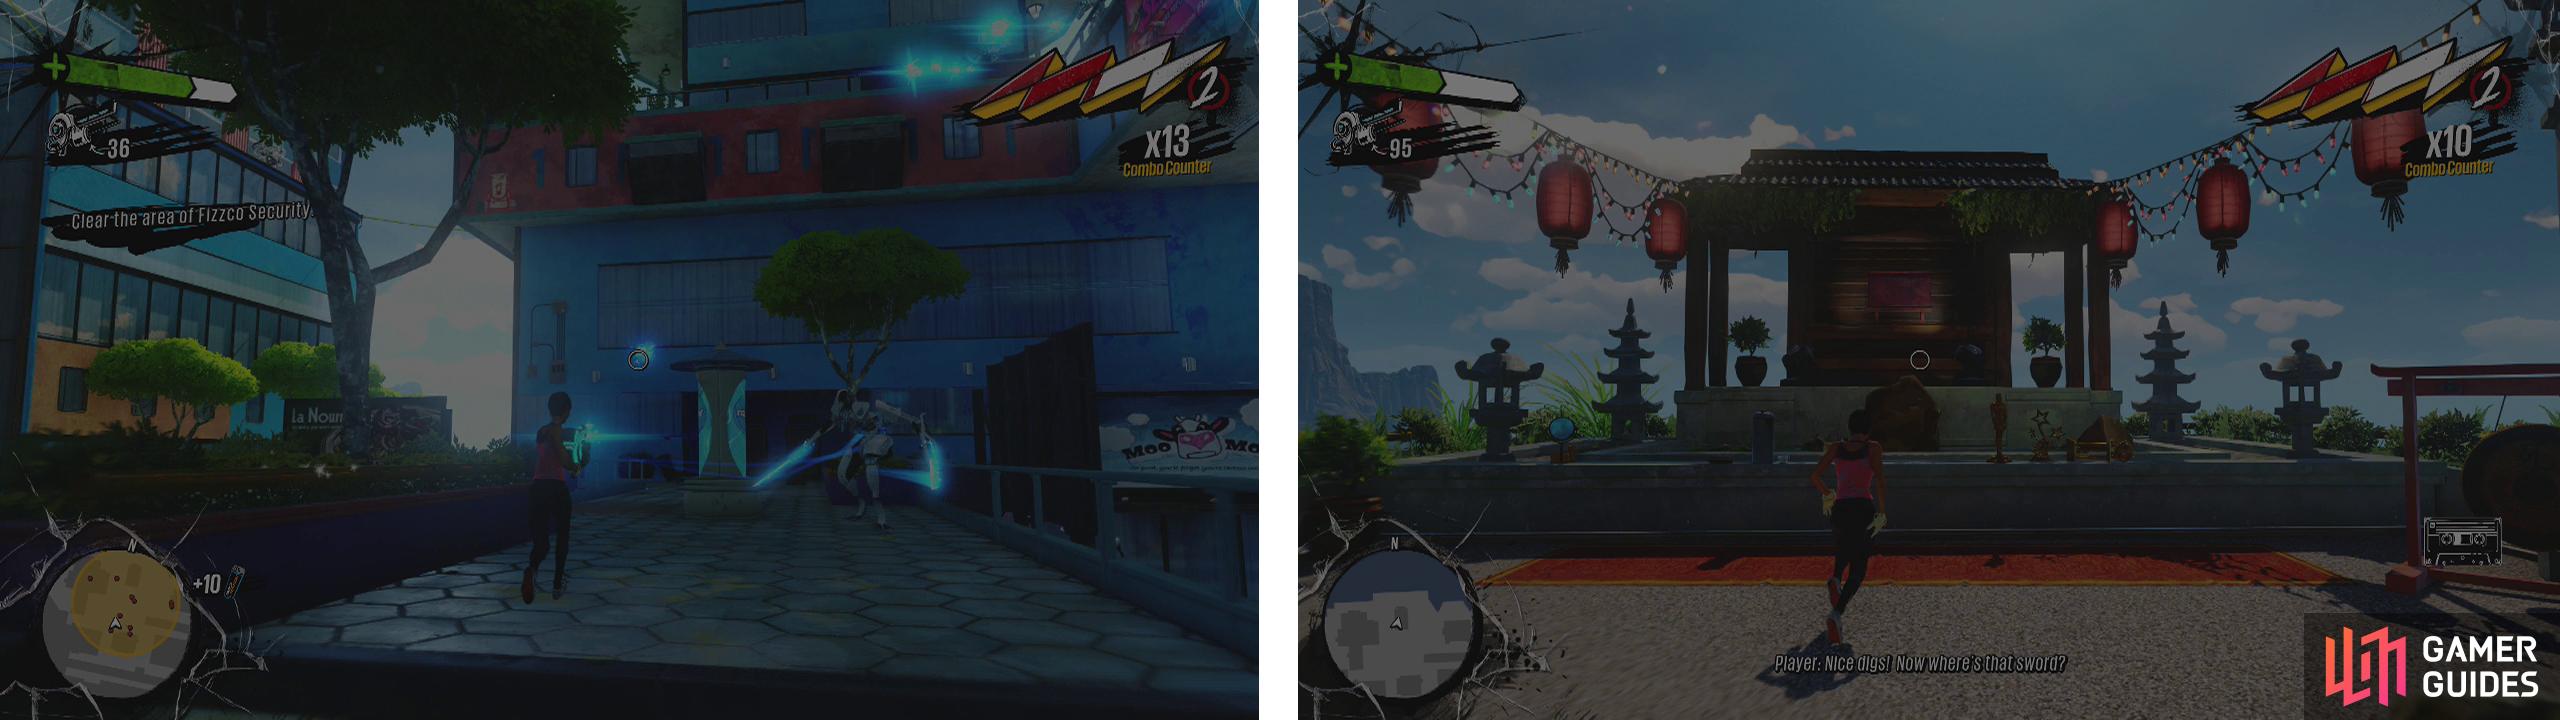 Clear the yellow zone of Fizzco Security (left) and then make your way to the rooftop (right) for a scene.